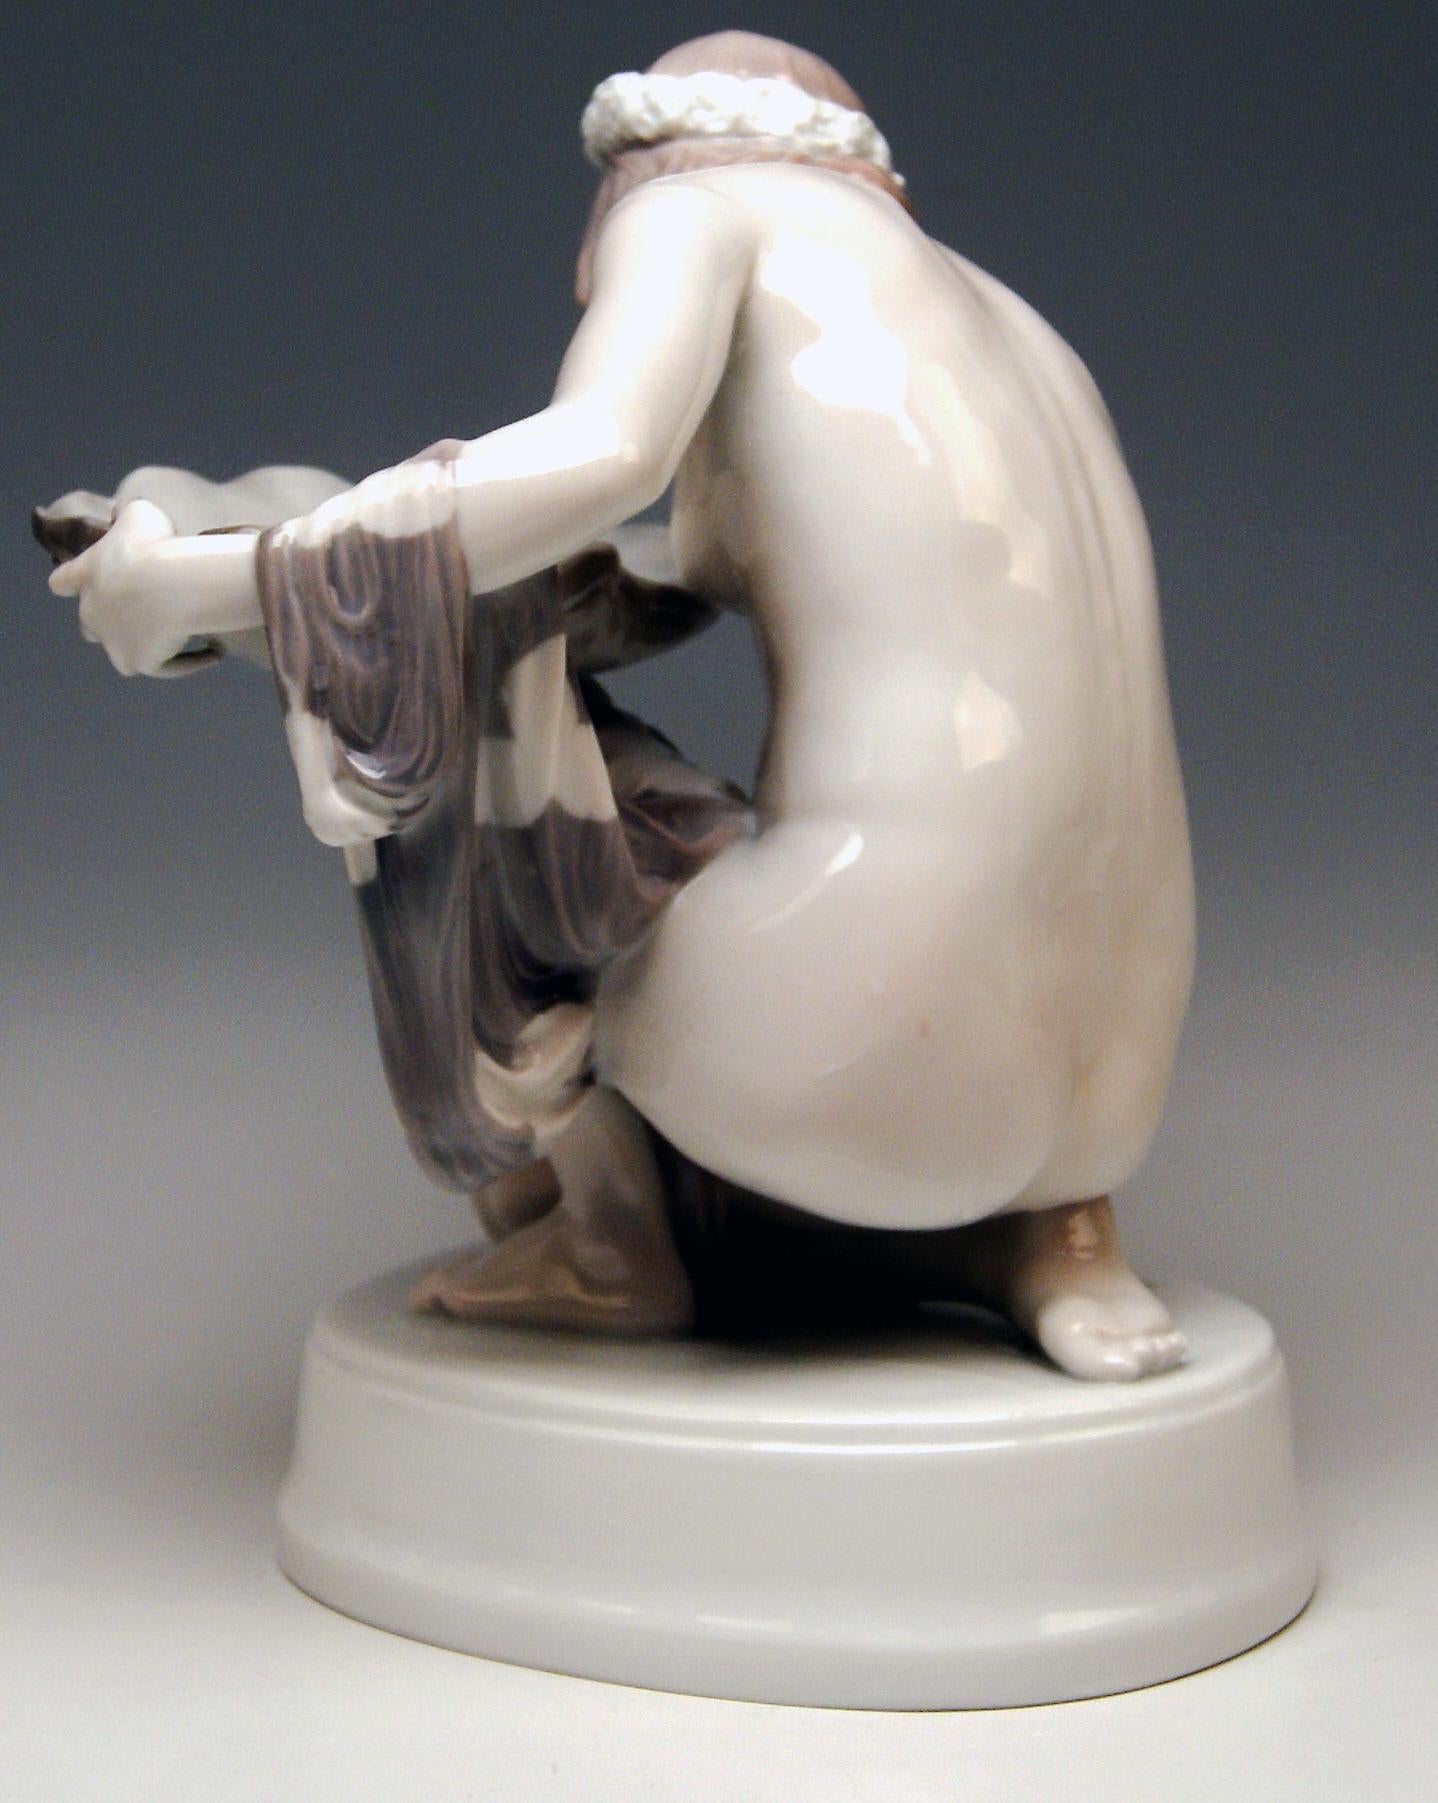 Rosenthal Germany stunning female figurine: The Pearl Seeker

Manufactory: Selb (Art Department) / Bavaria / Rosenthal Germany 
Dating: manufactured 1920 (= quite early!) 
Material and technique: porcelain / chinaware / painted / glazed (glossy